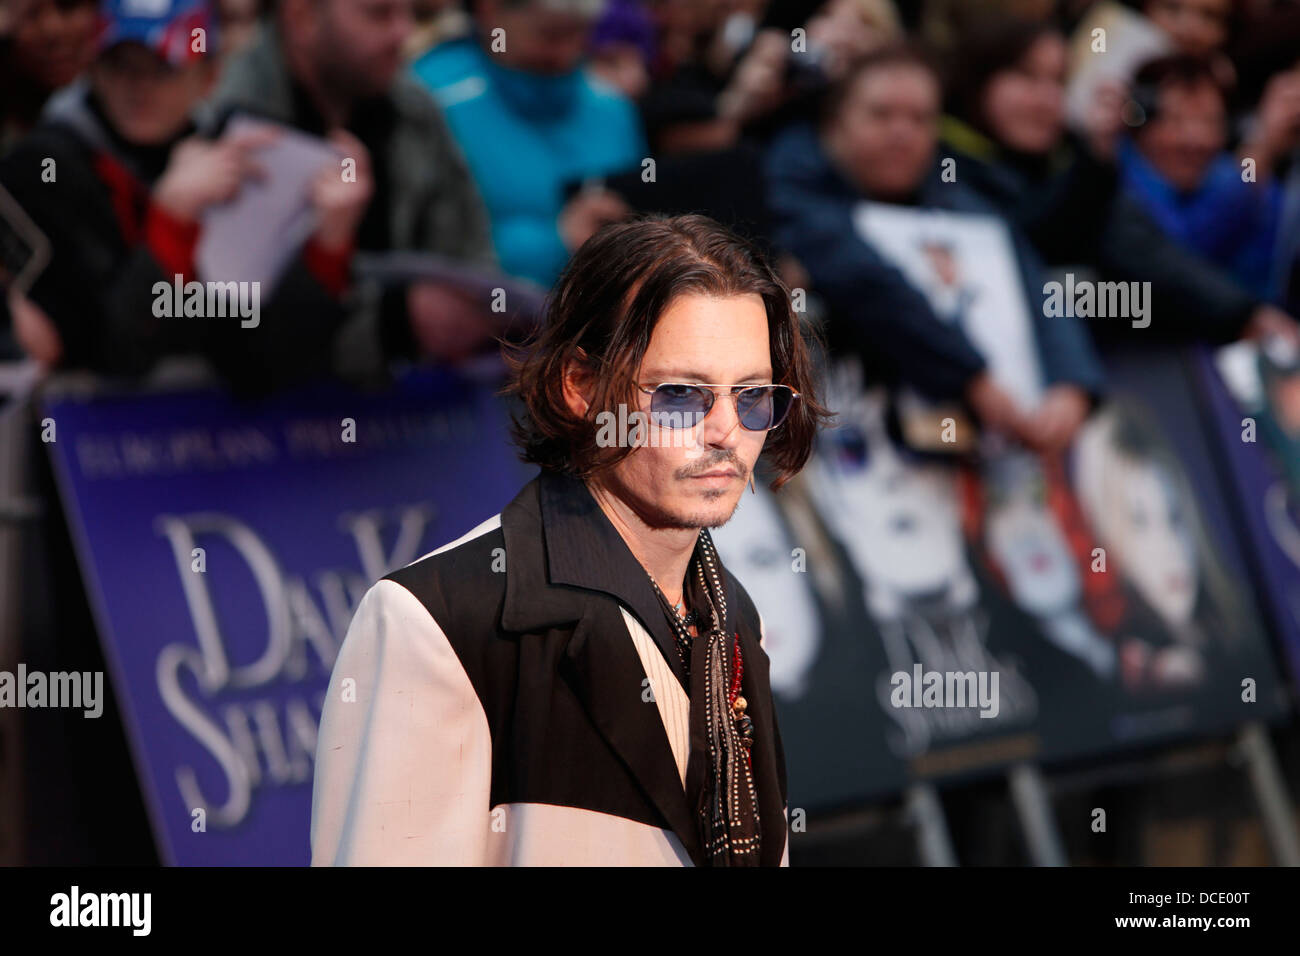 US actor Johnny Depp arrives on the red carpet to attend the UK premiere of the film 'Dark Shadows' in London on May 9, 2012. Stock Photo